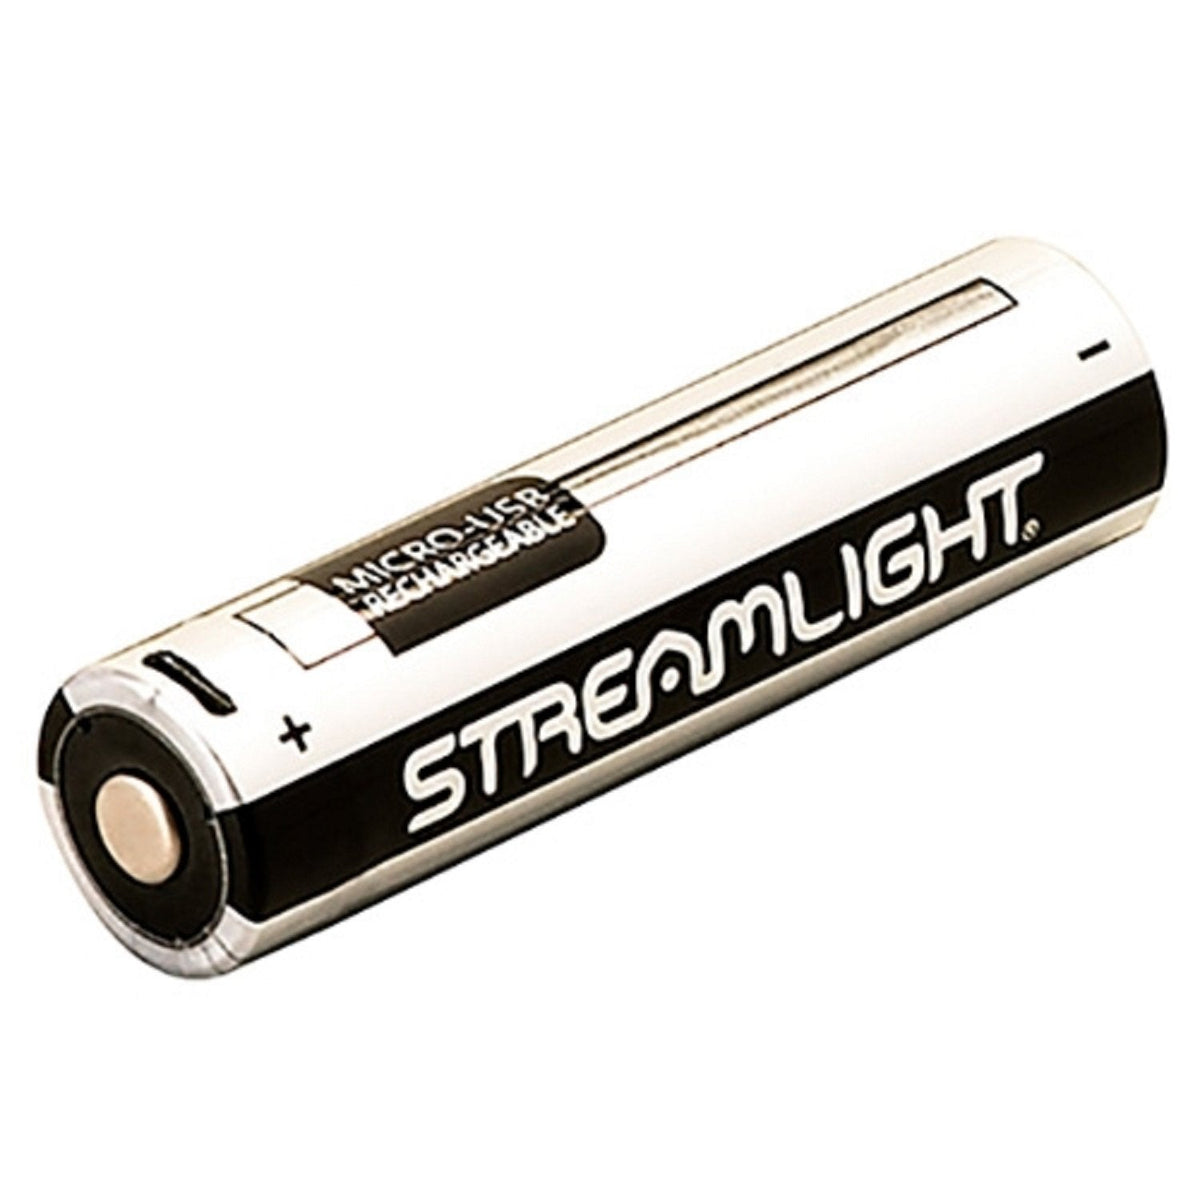 Streamlight USB Rechargeable 18650 Battery 2 Pack Flashlights and Lighting Streamlight Tactical Gear Supplier Tactical Distributors Australia